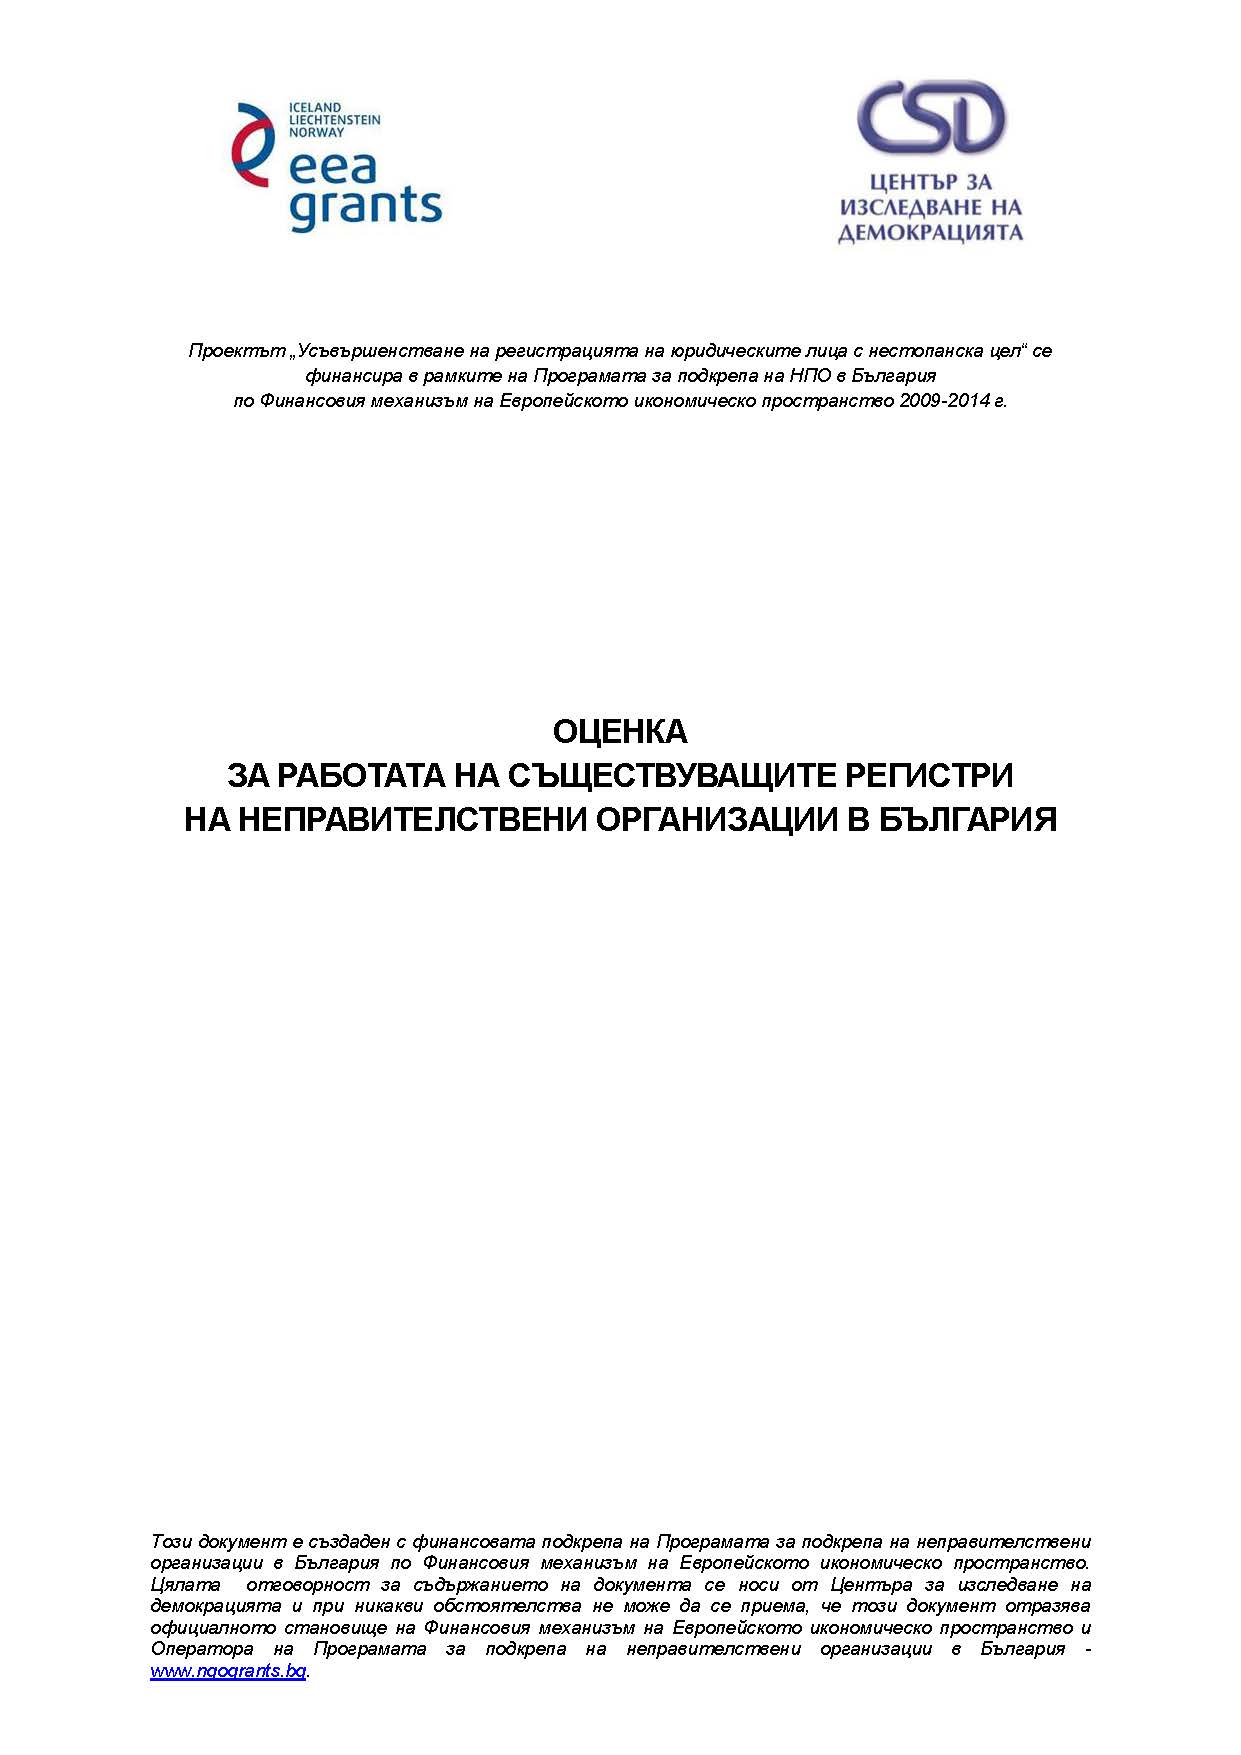 Evaluation of the work of the existing registers of NGOs in Bulgaria Cover Image